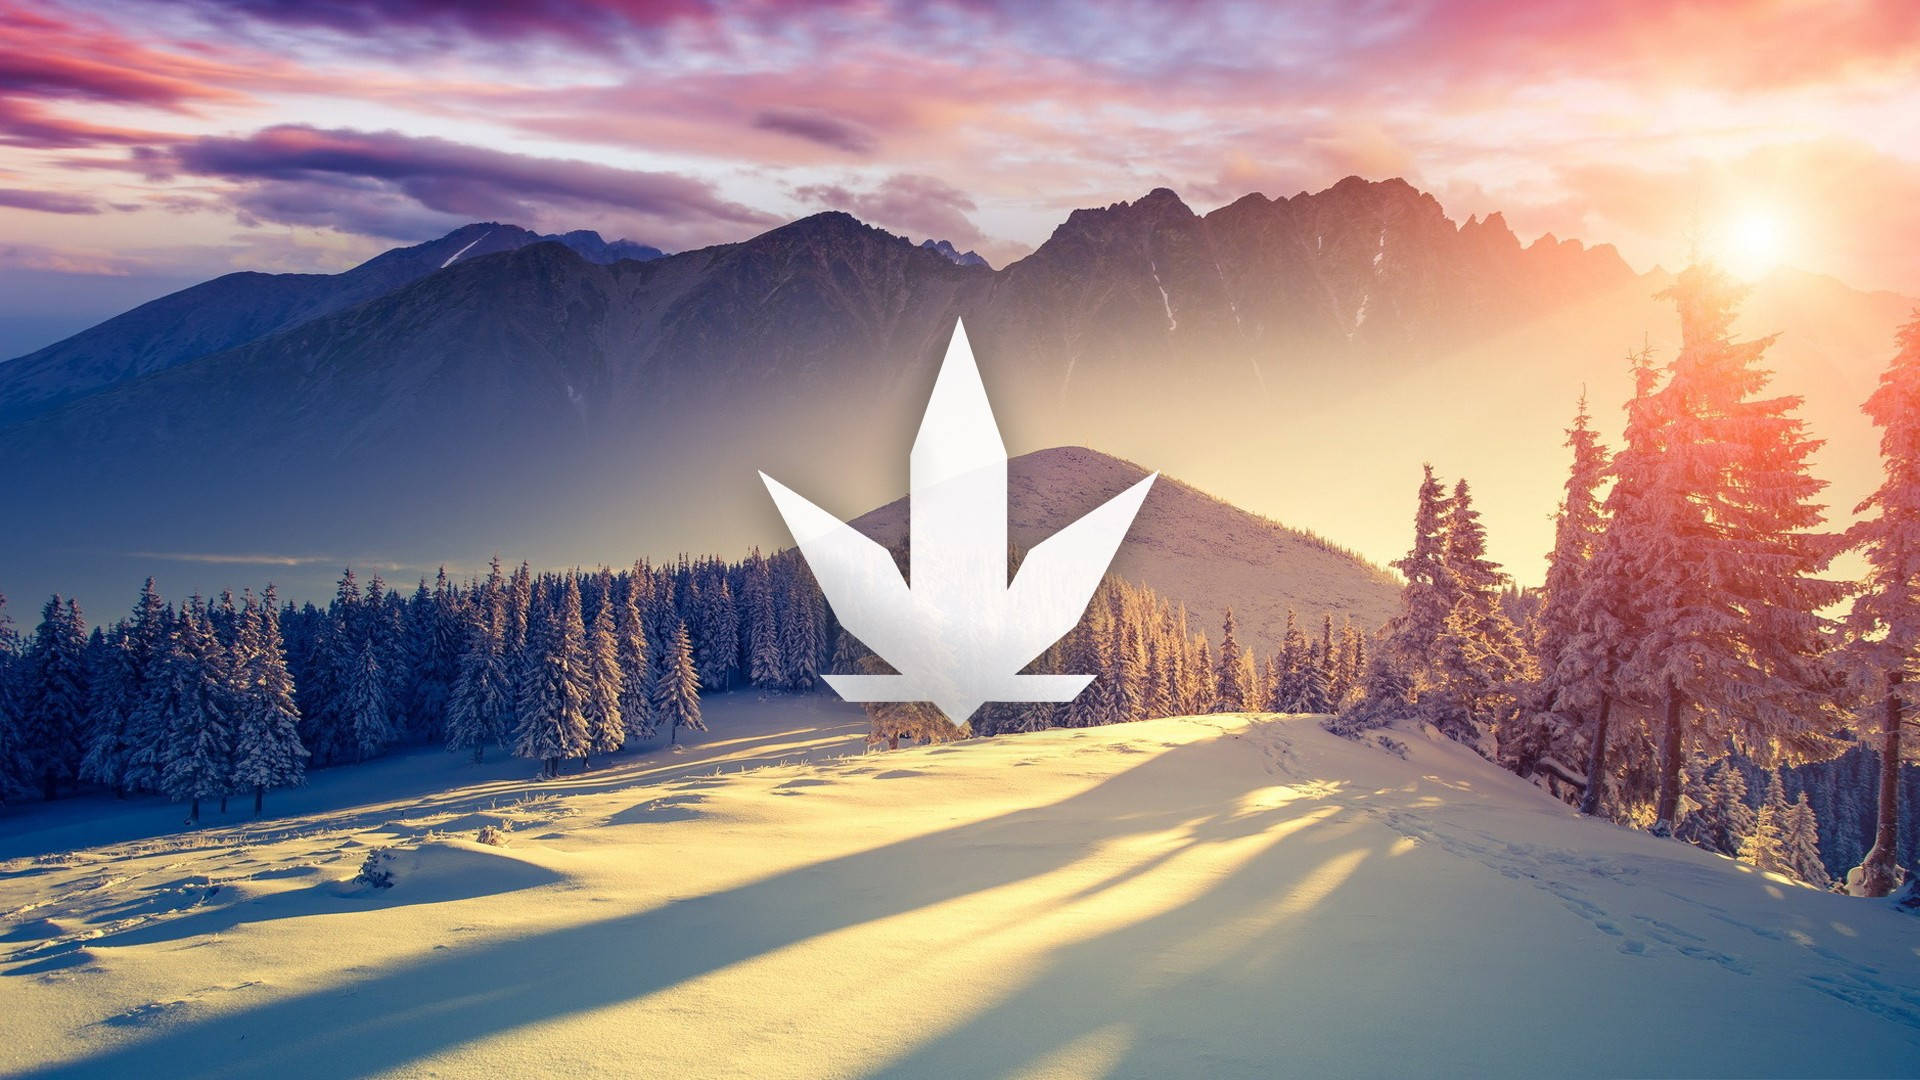 420 Weed On Snowy Landscape Background